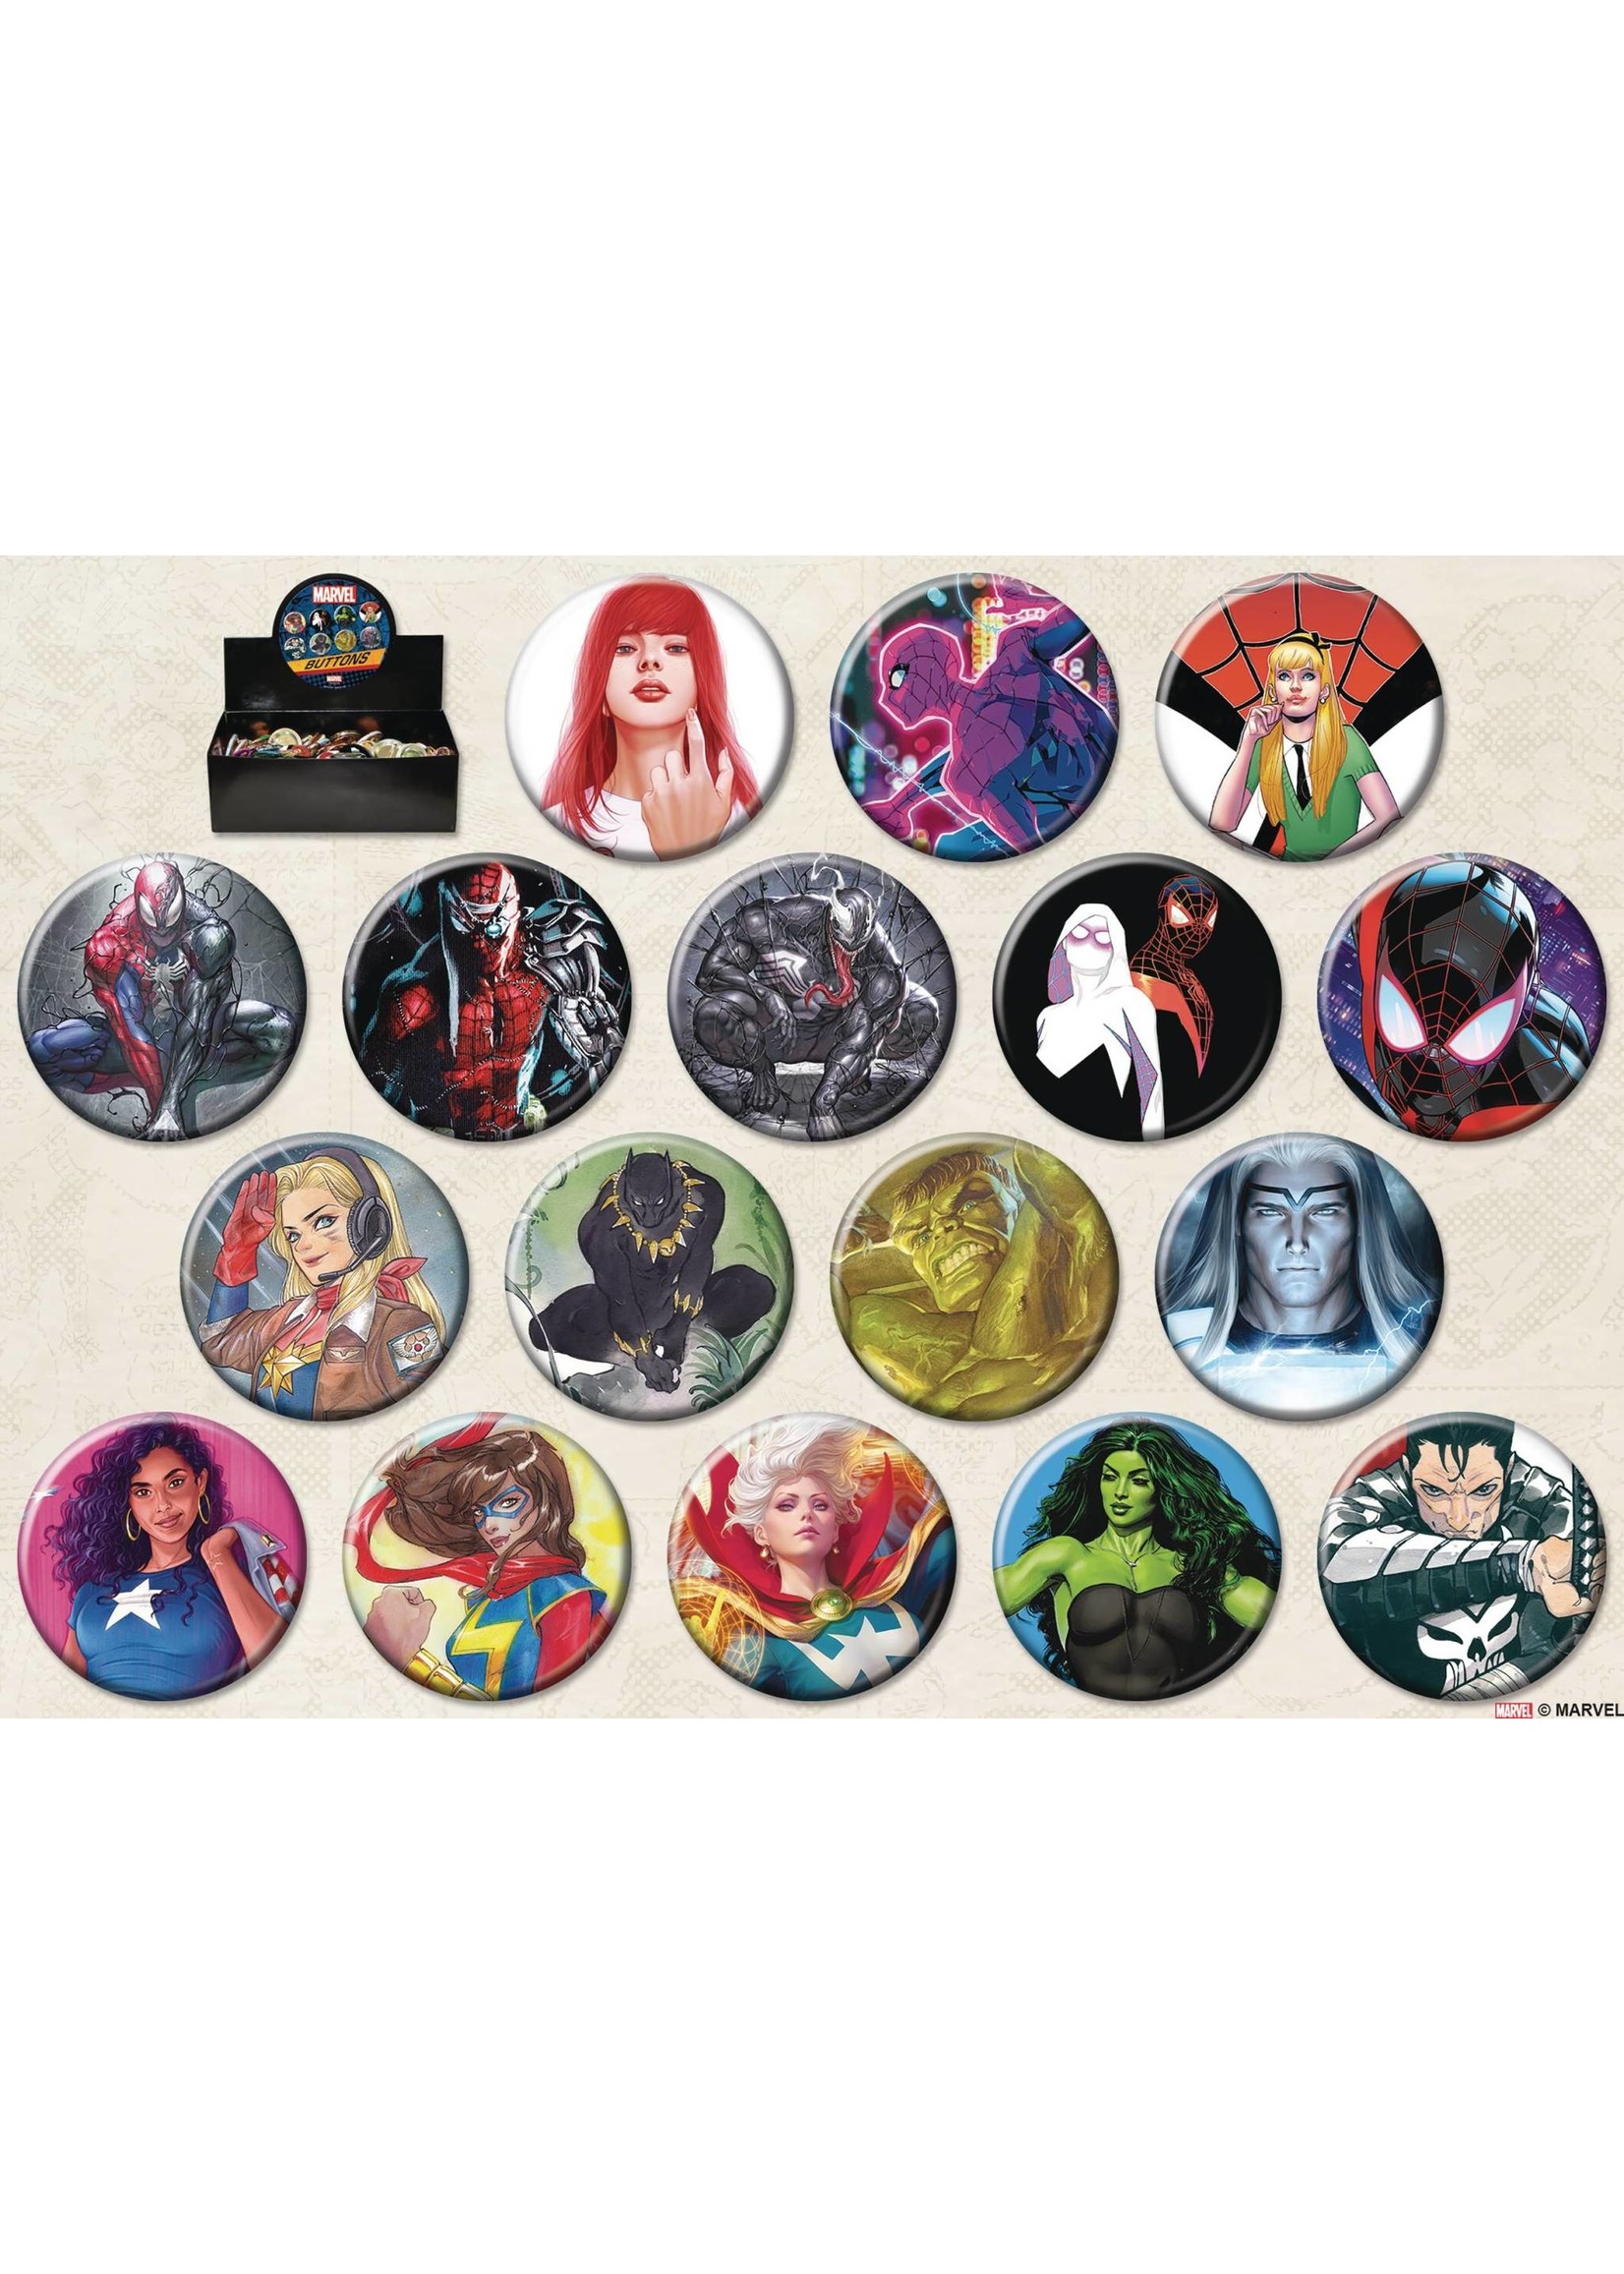 MARVEL COMICS COVERS BUTTONS